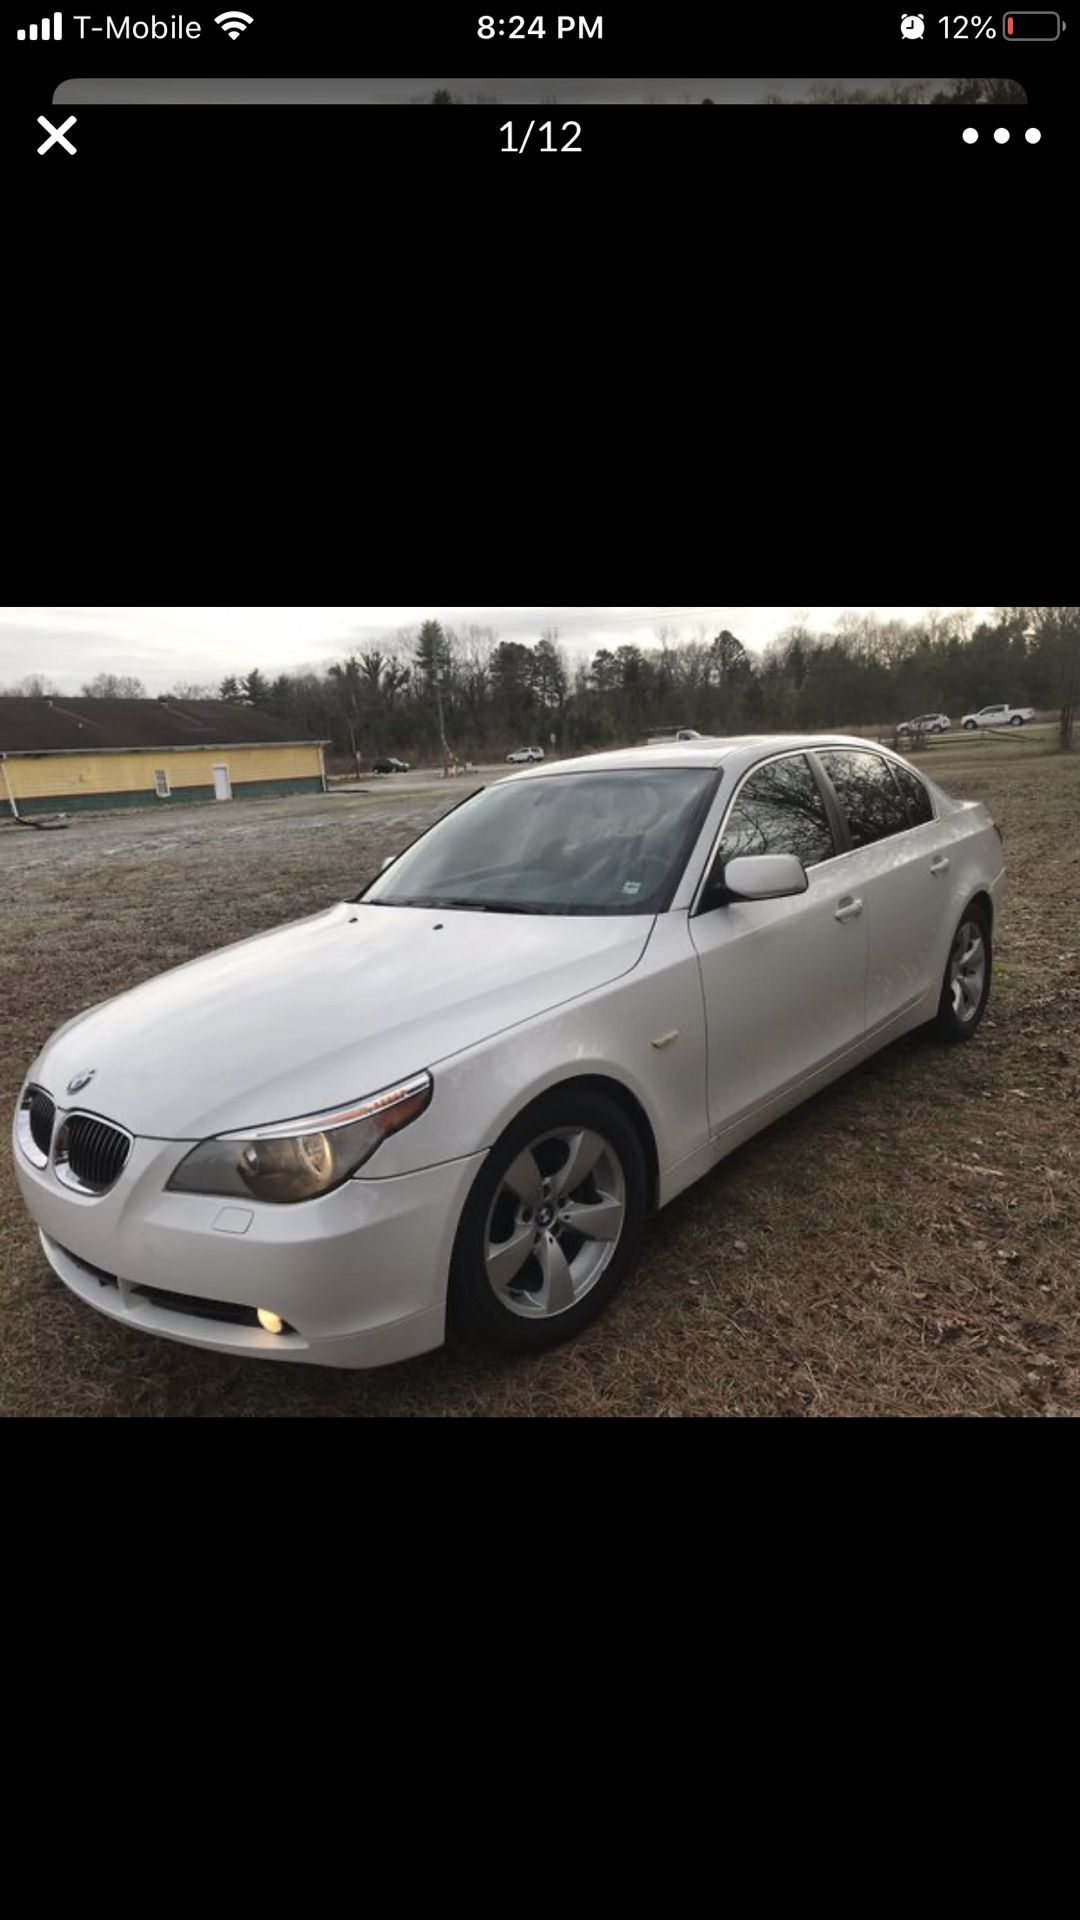 2006 bmw 525i All Power, Bluetooth, Heated Seats, Sunroof, Steering Wheel Controls, Cruise, Clean Title just put a used transmission run and drives g